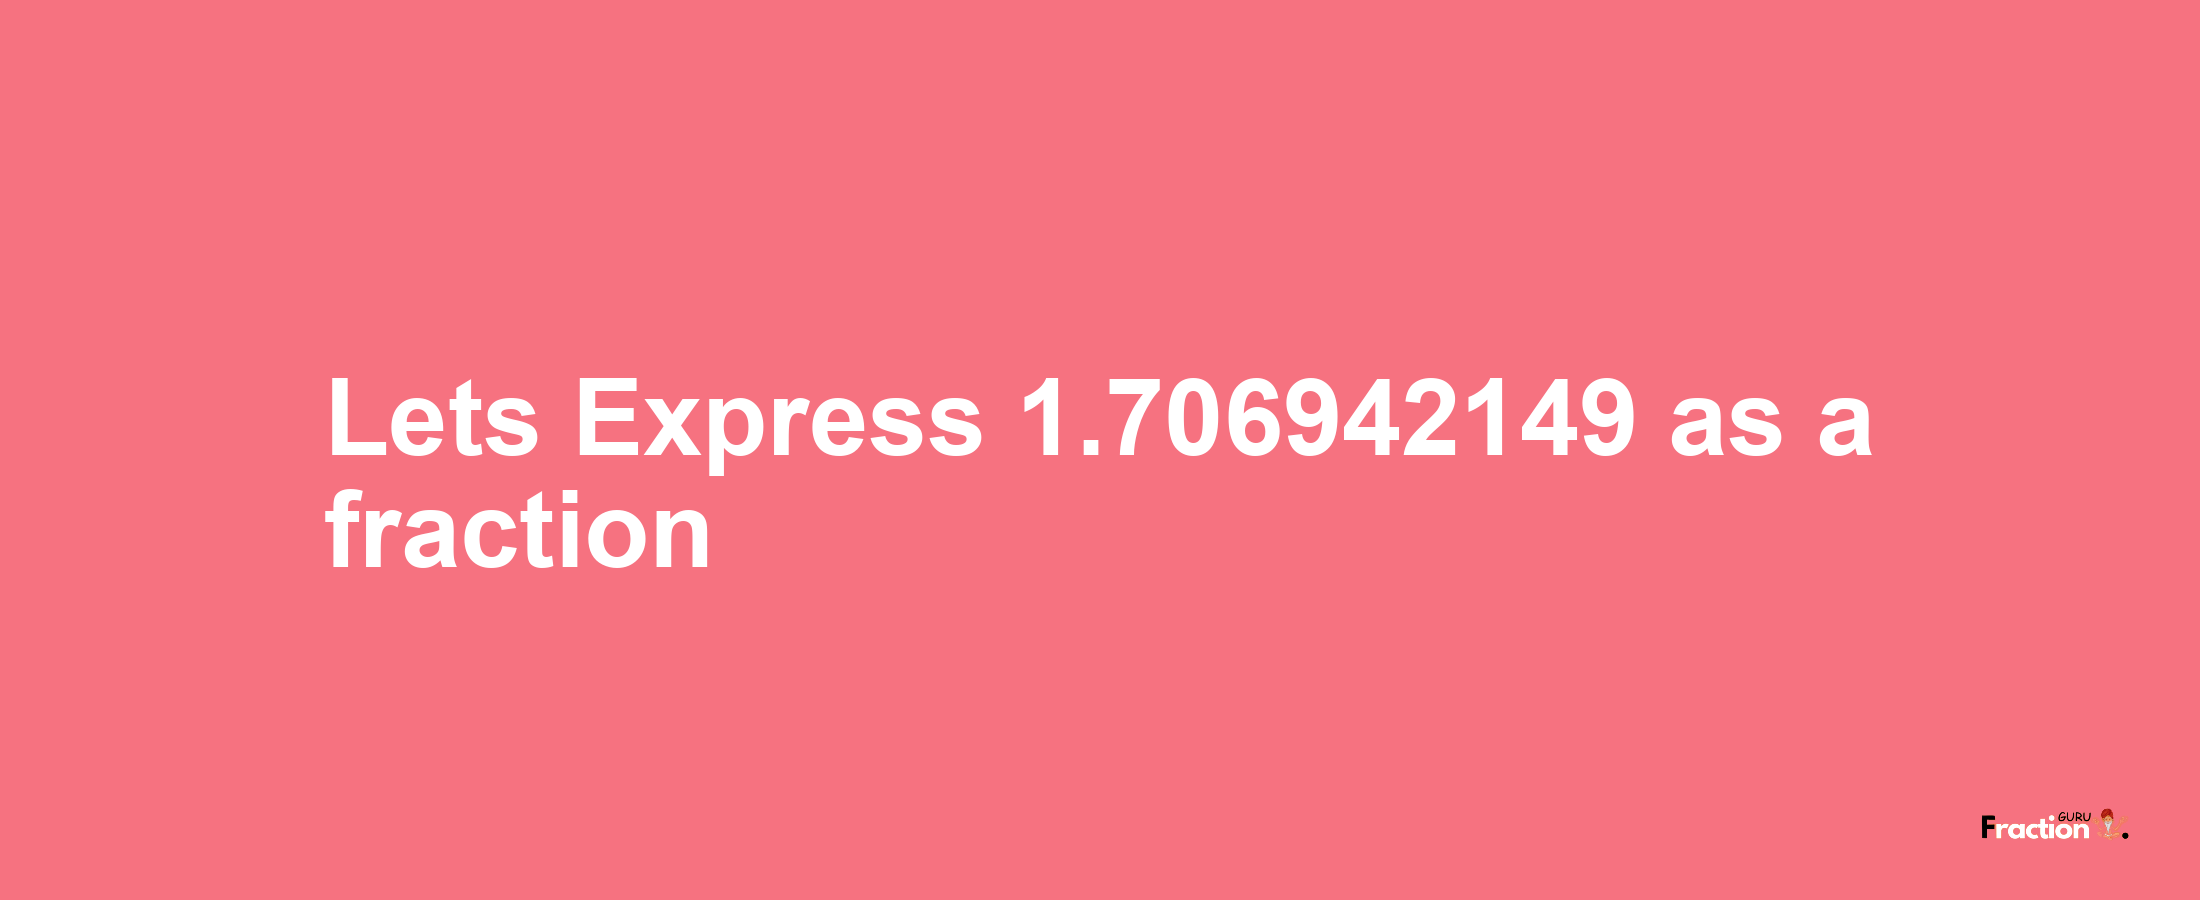 Lets Express 1.706942149 as afraction